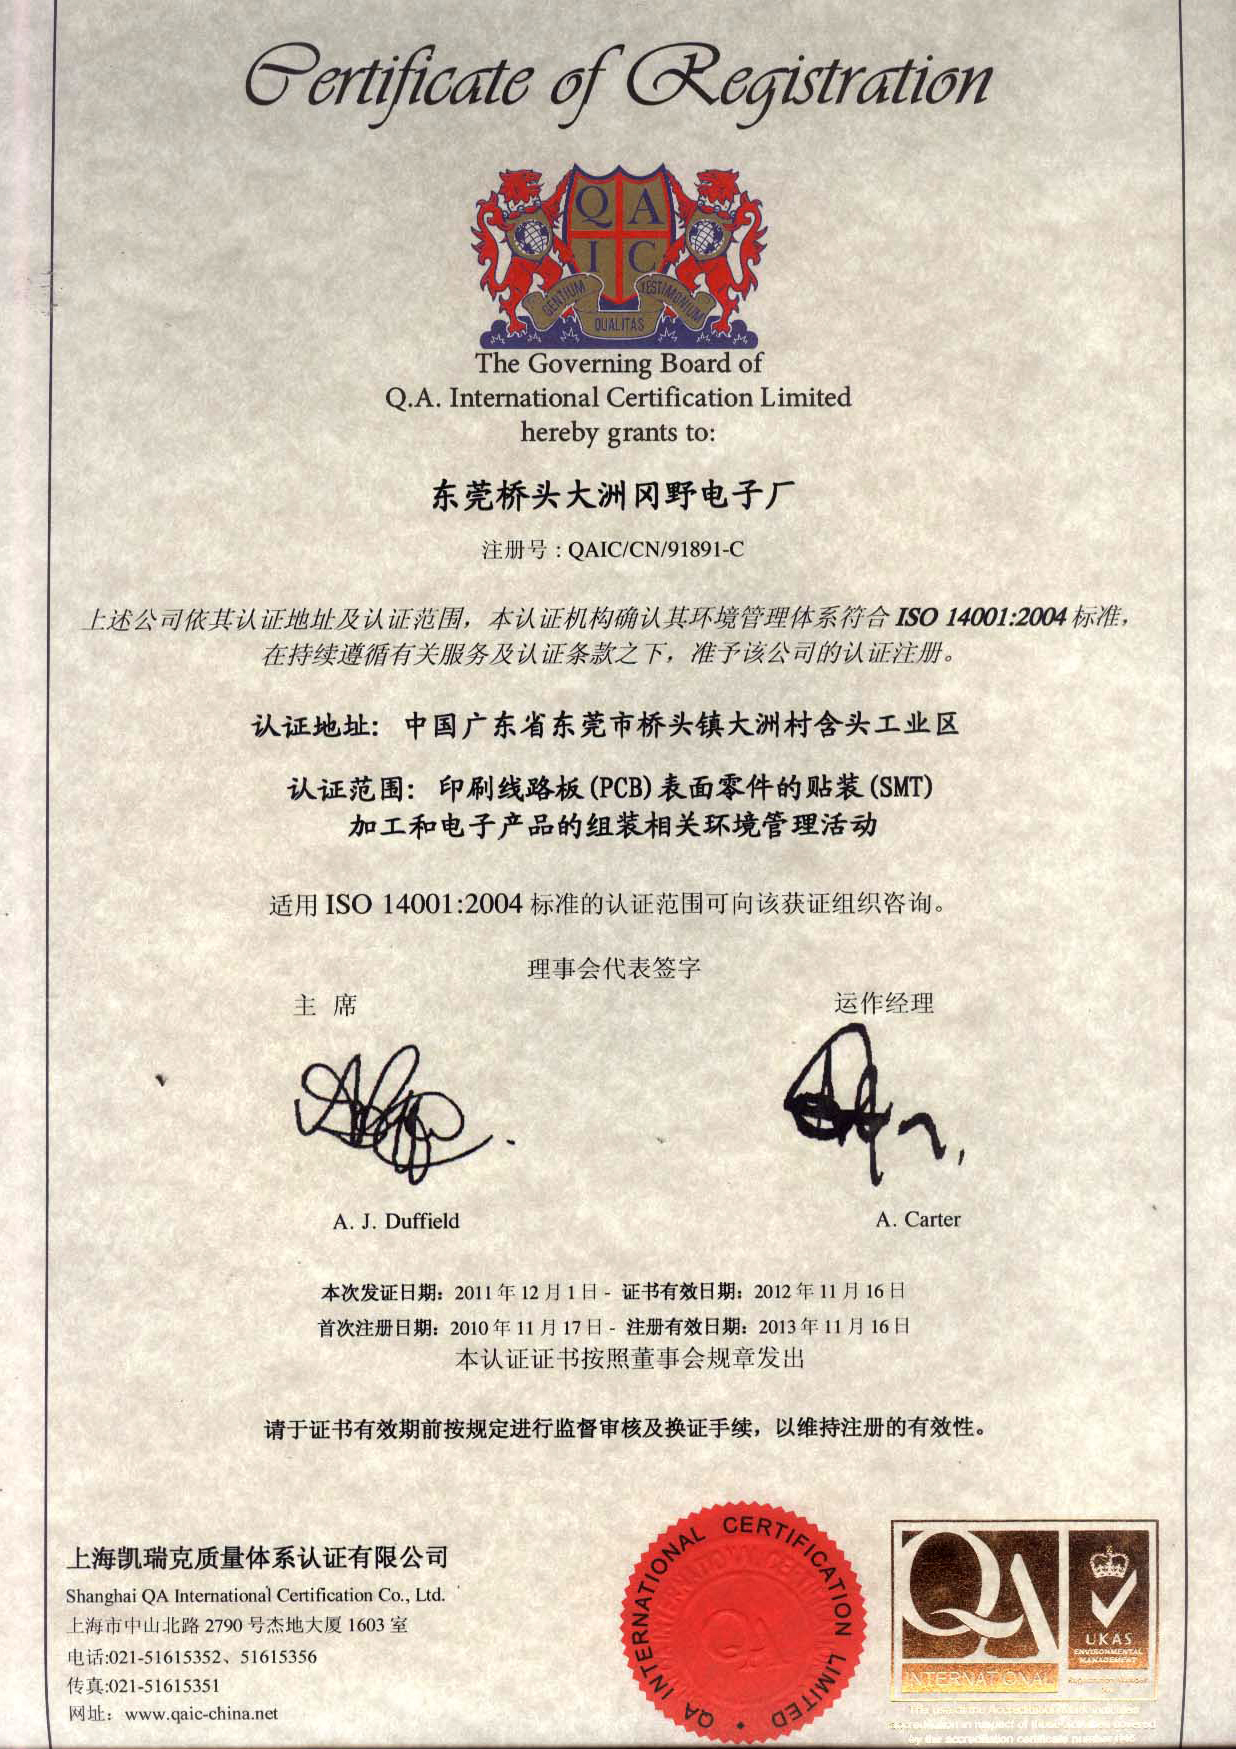 This is certificate of ISO14001 Chinese language for OKTEK smt pcba first manufacturer